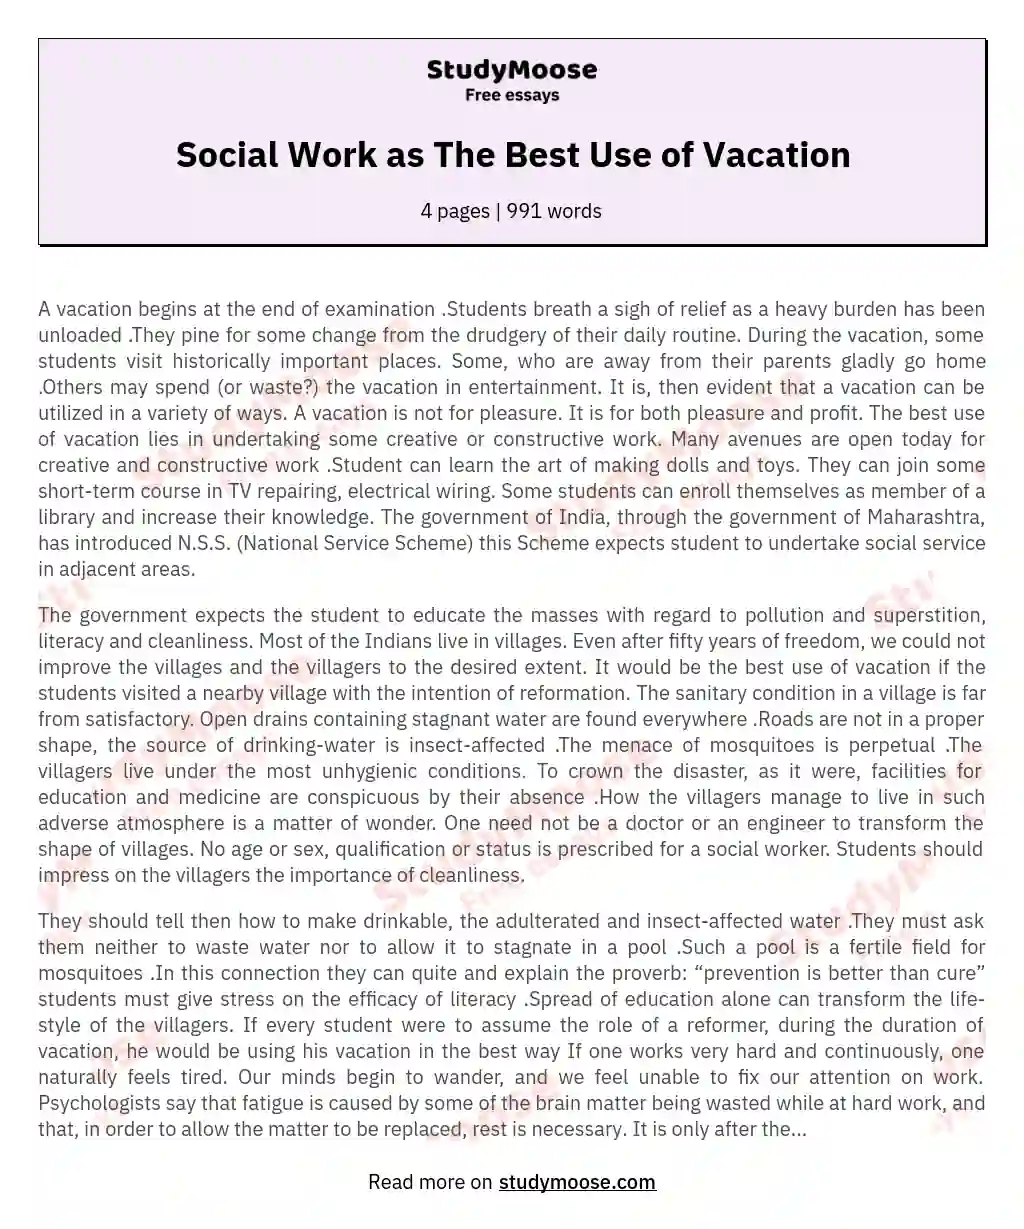 Social Work as The Best Use of Vacation essay